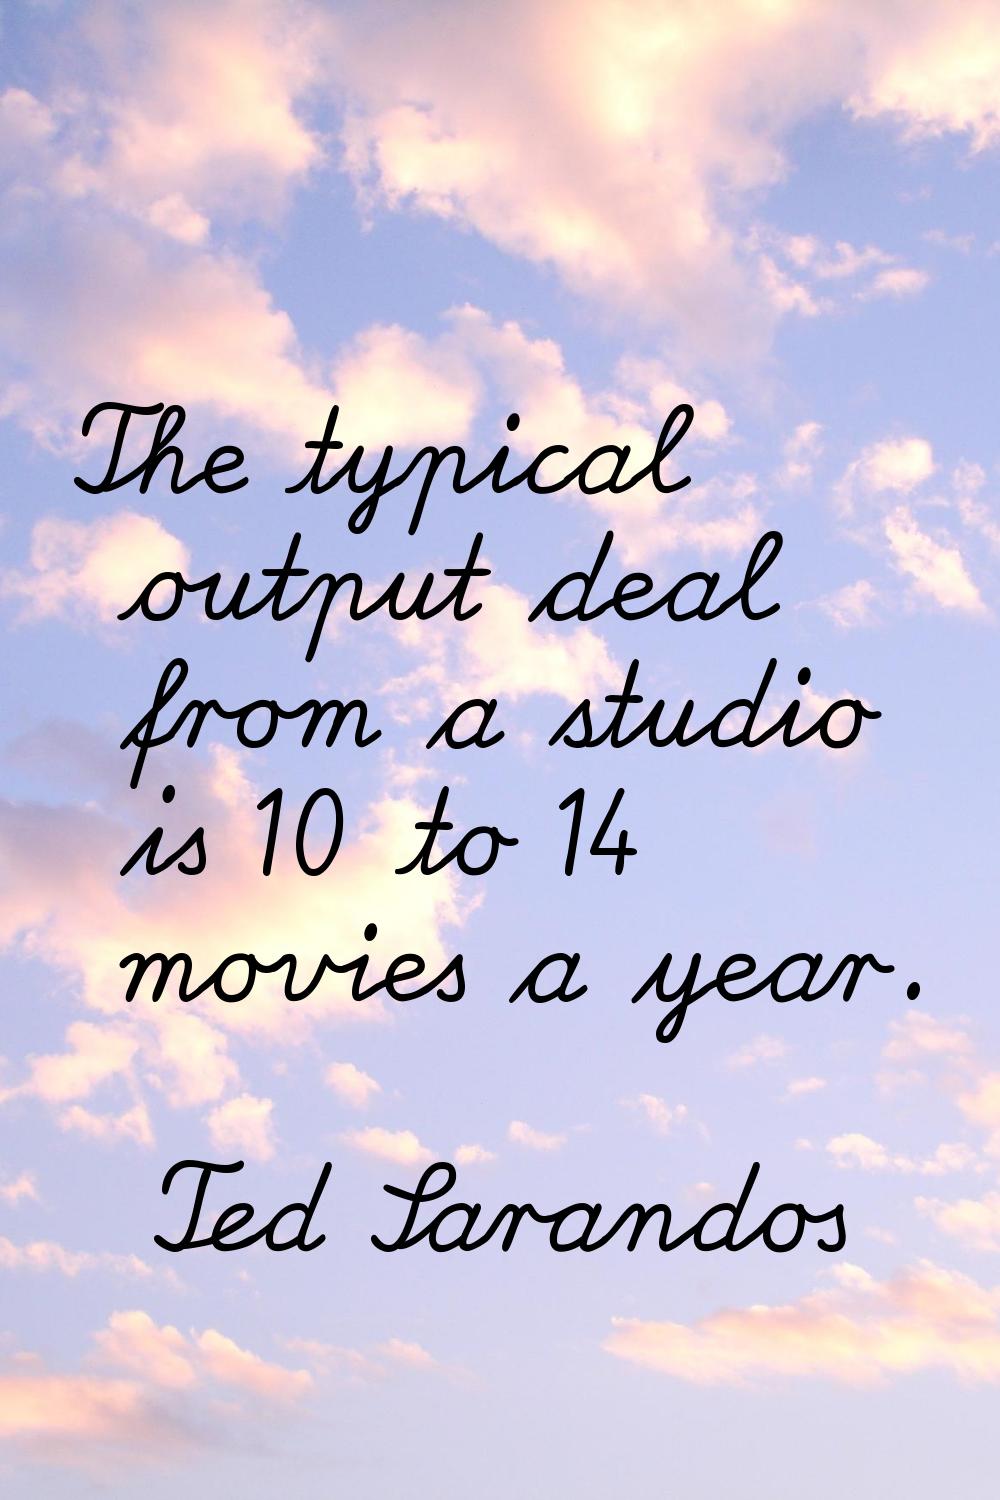 The typical output deal from a studio is 10 to 14 movies a year.